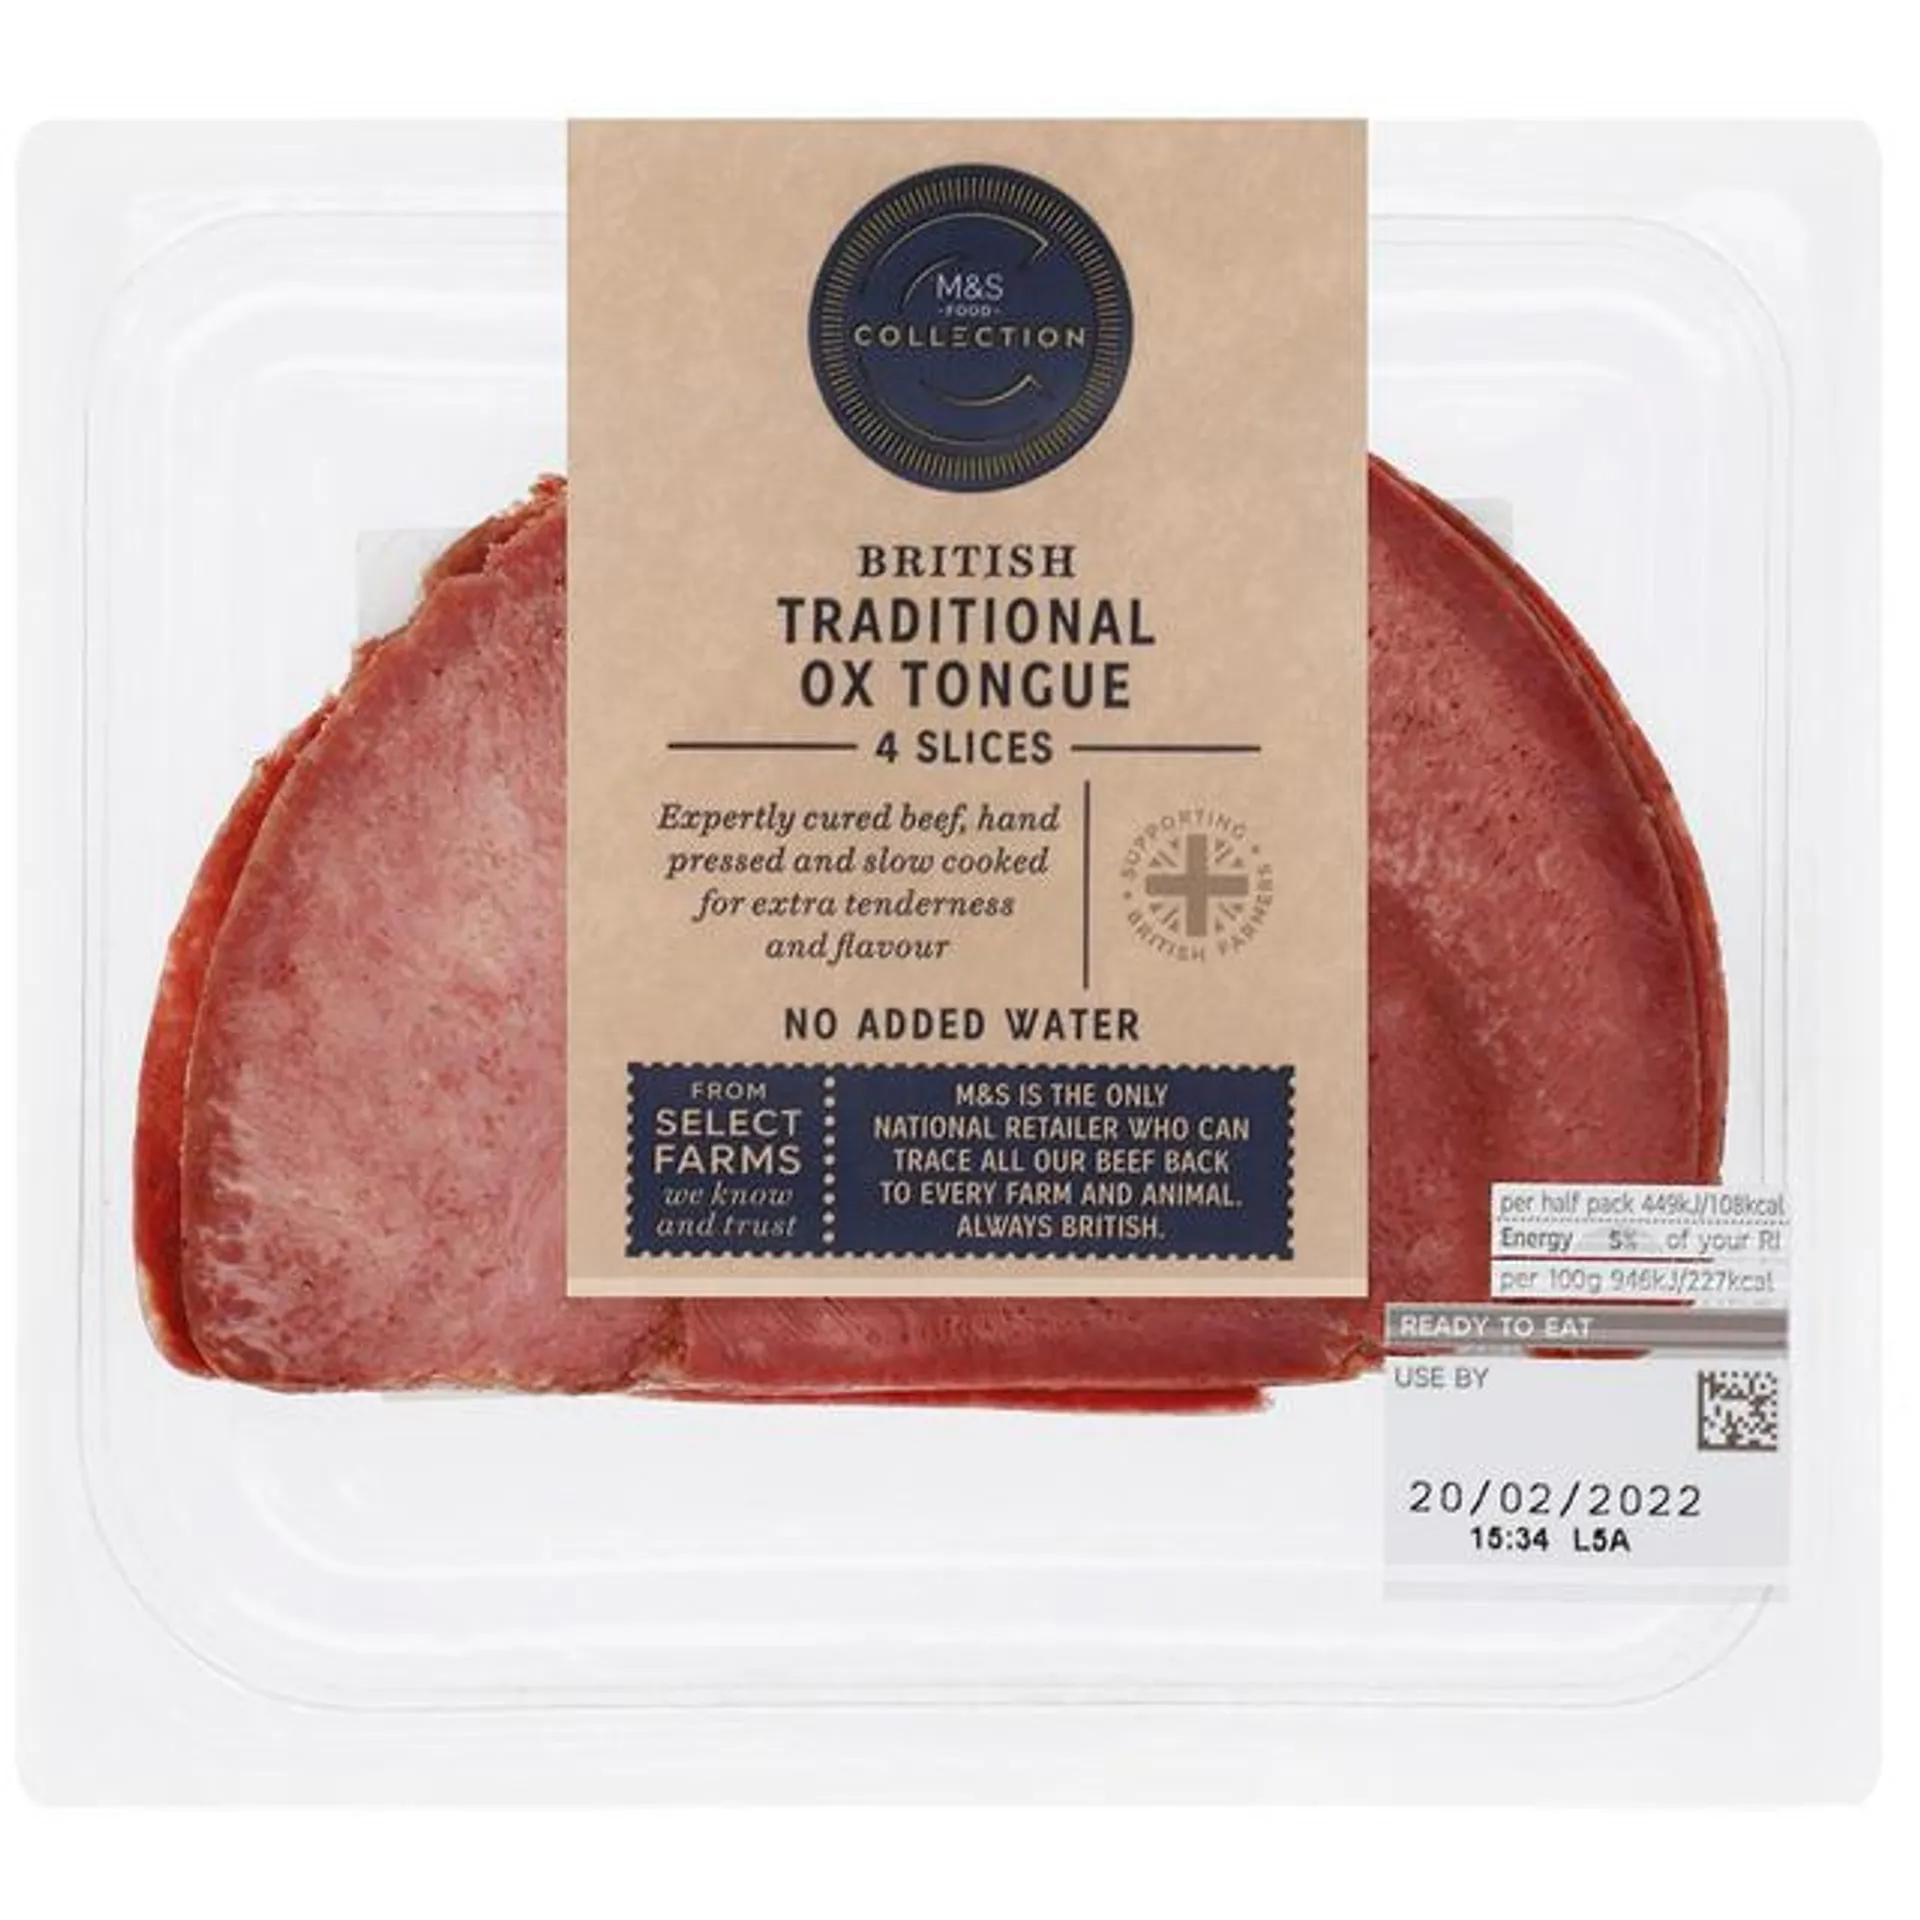 M&S Hand Pressed Ox Tongue 4 Slices